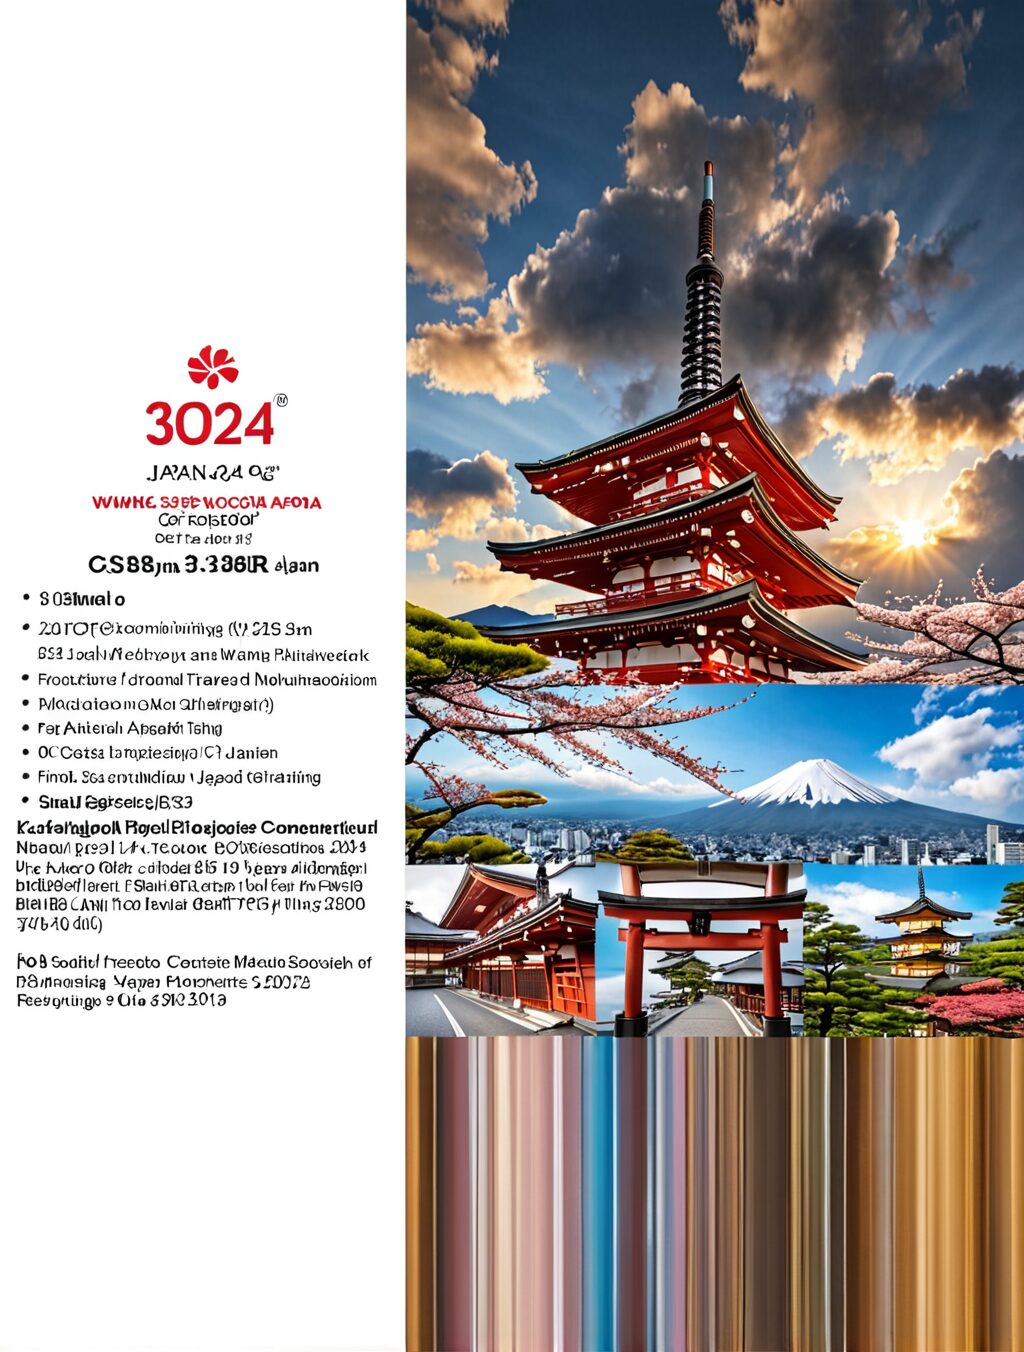 japan travel packages 2024 costco